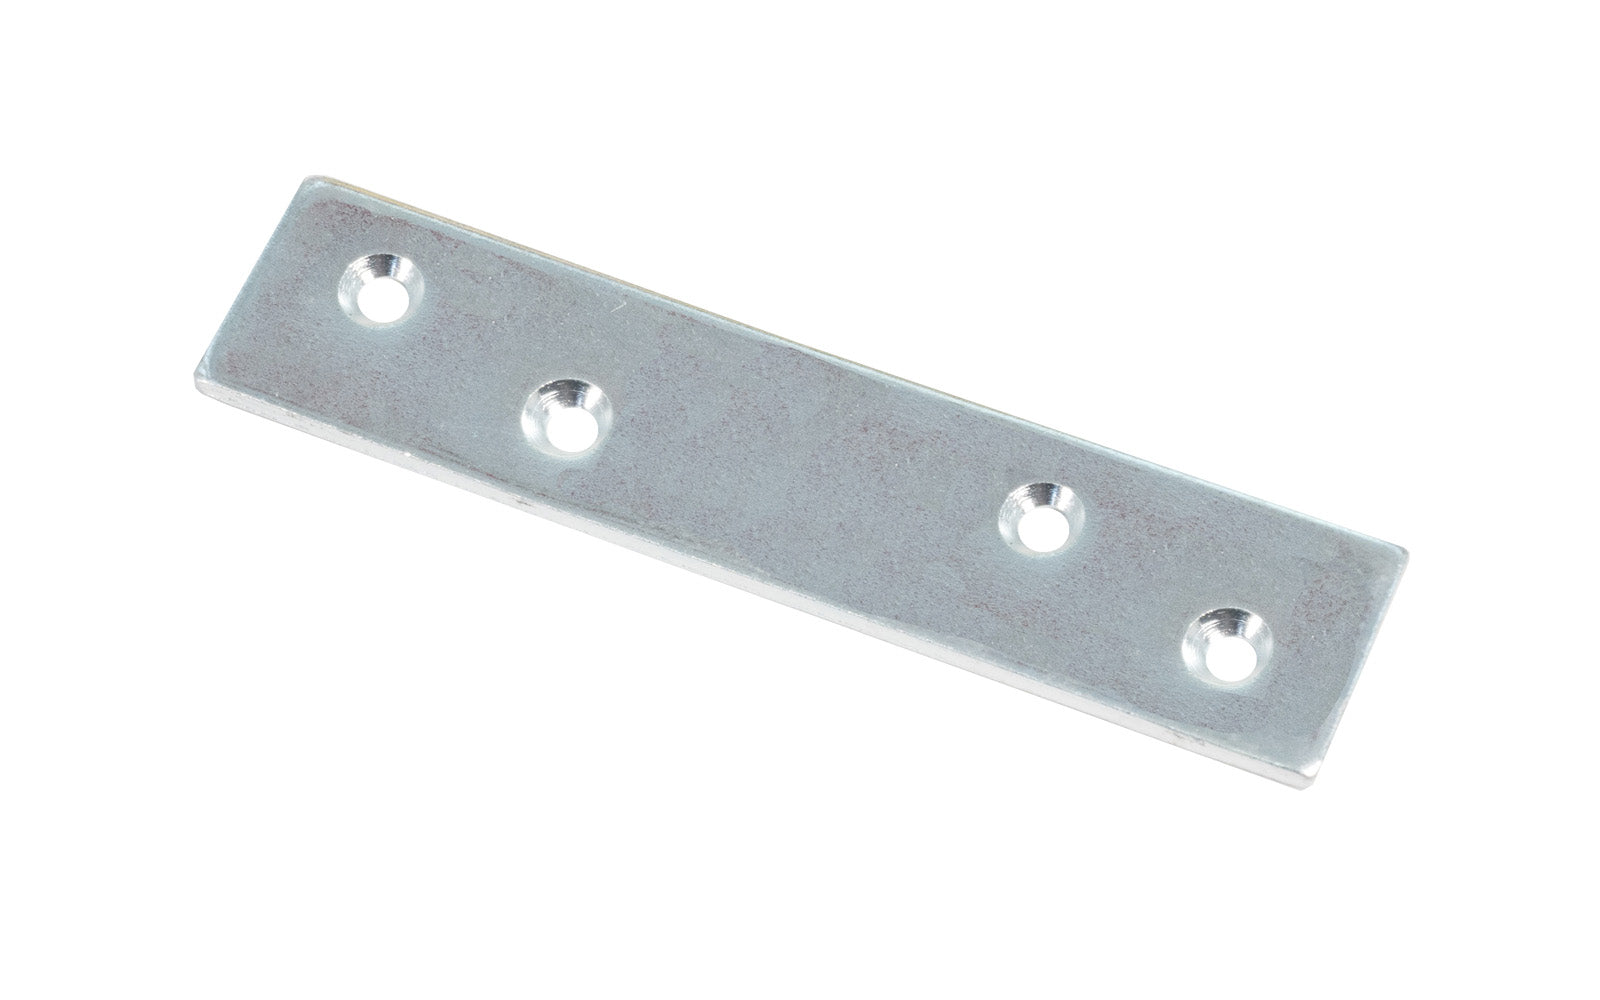 These flat mending plate irons are designed for furniture, cabinets, shelving support, etc. Allows for quick & easy repair of items in the workshop, home, & other applications. Made of steel material with a zinc plated finish. Countersunk holes. Sold as singles, or bulk box of (48) mending braces. 4"  long size. 